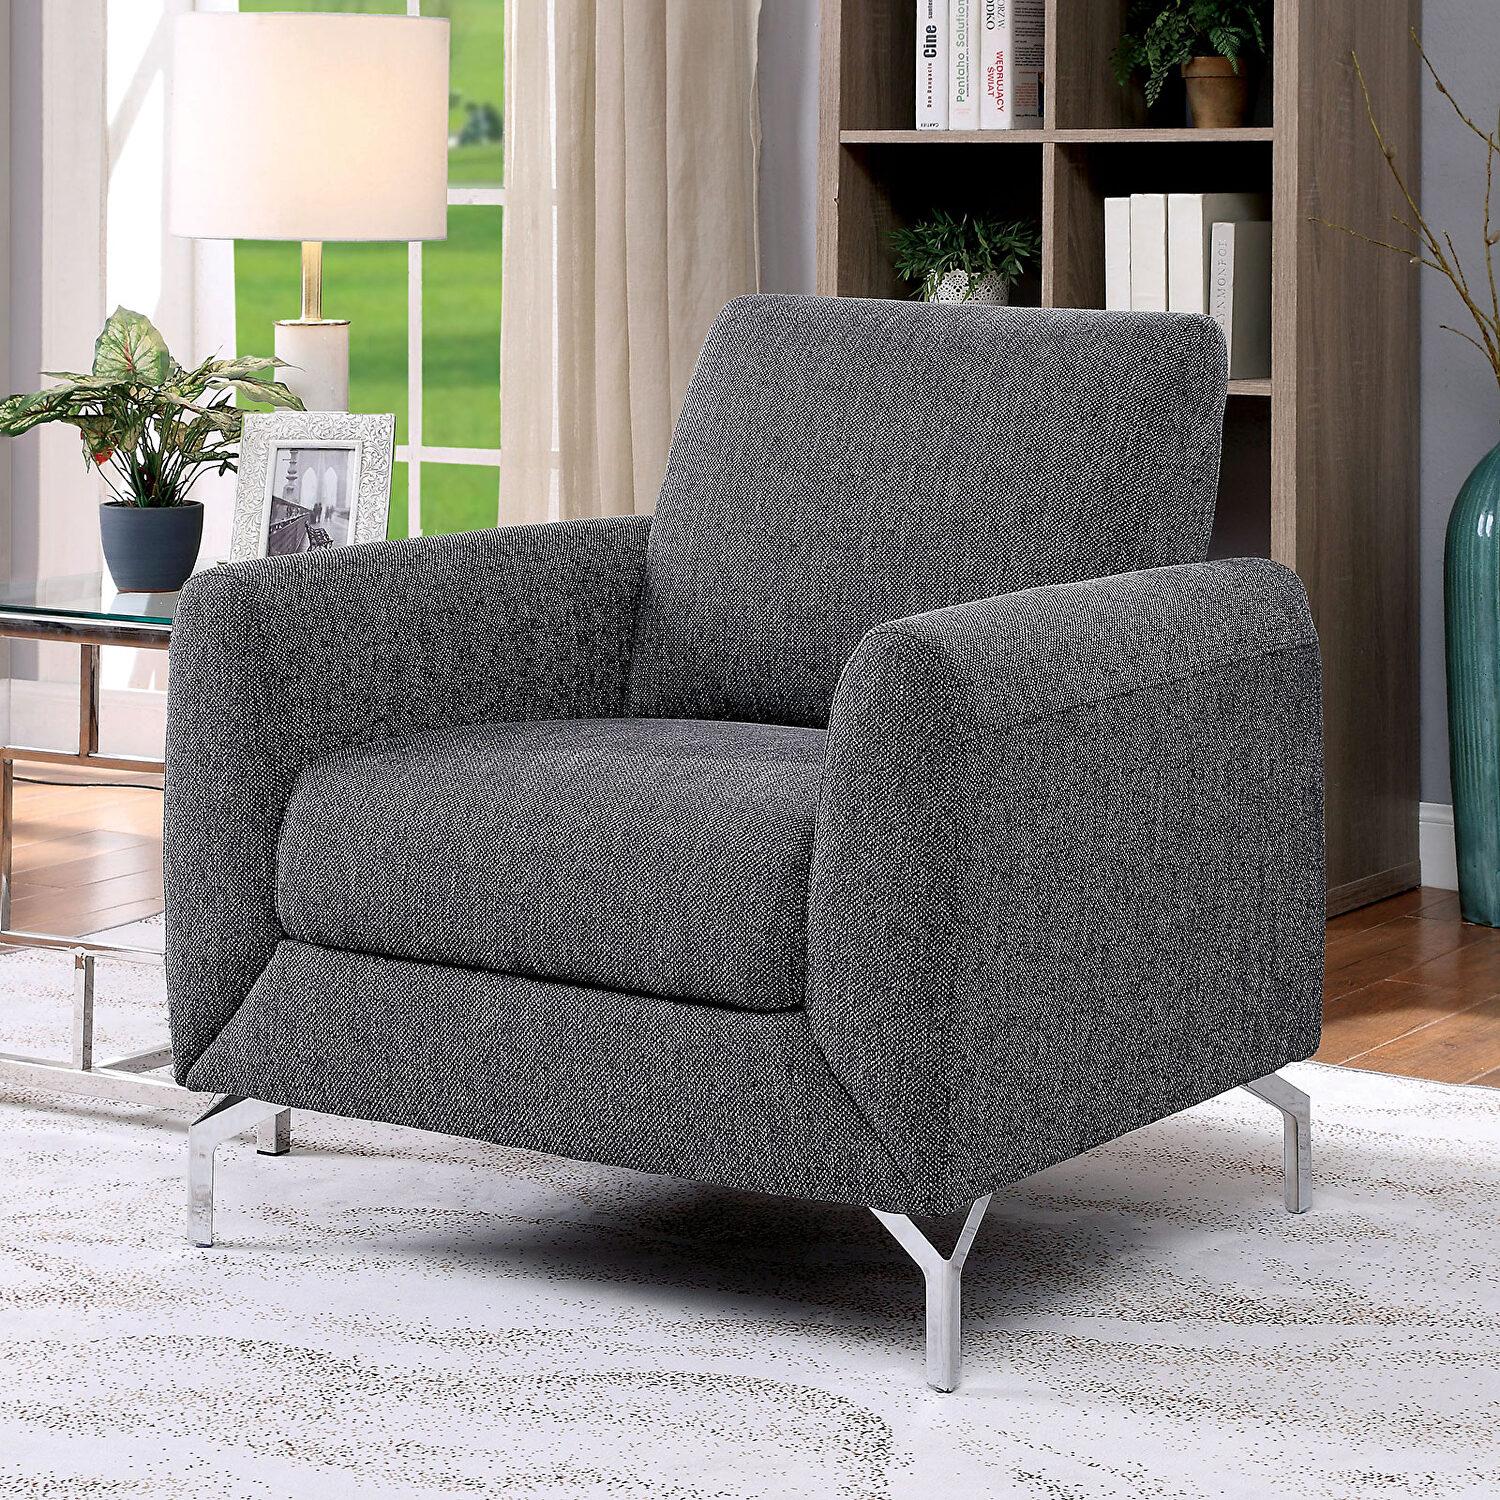 Transitional Arm Chair CM6088GY-CH Lauritz CM6088GY-CH in Gray Fabric